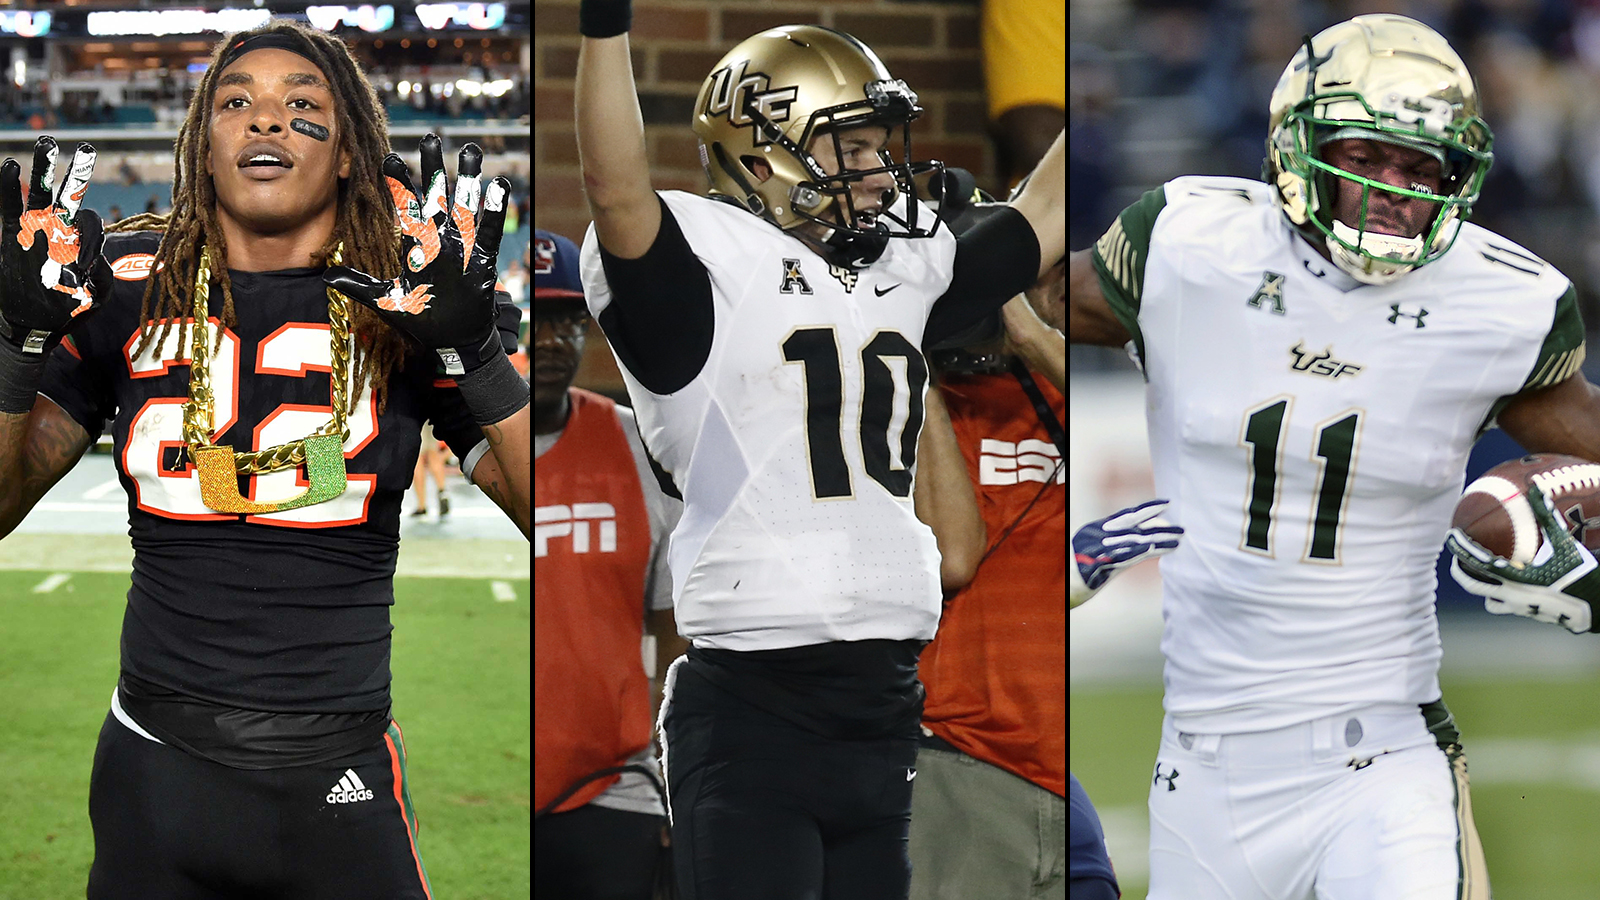 Miami continues upward trend, UCF gains ground, USF comes in at 22 in latest AP poll